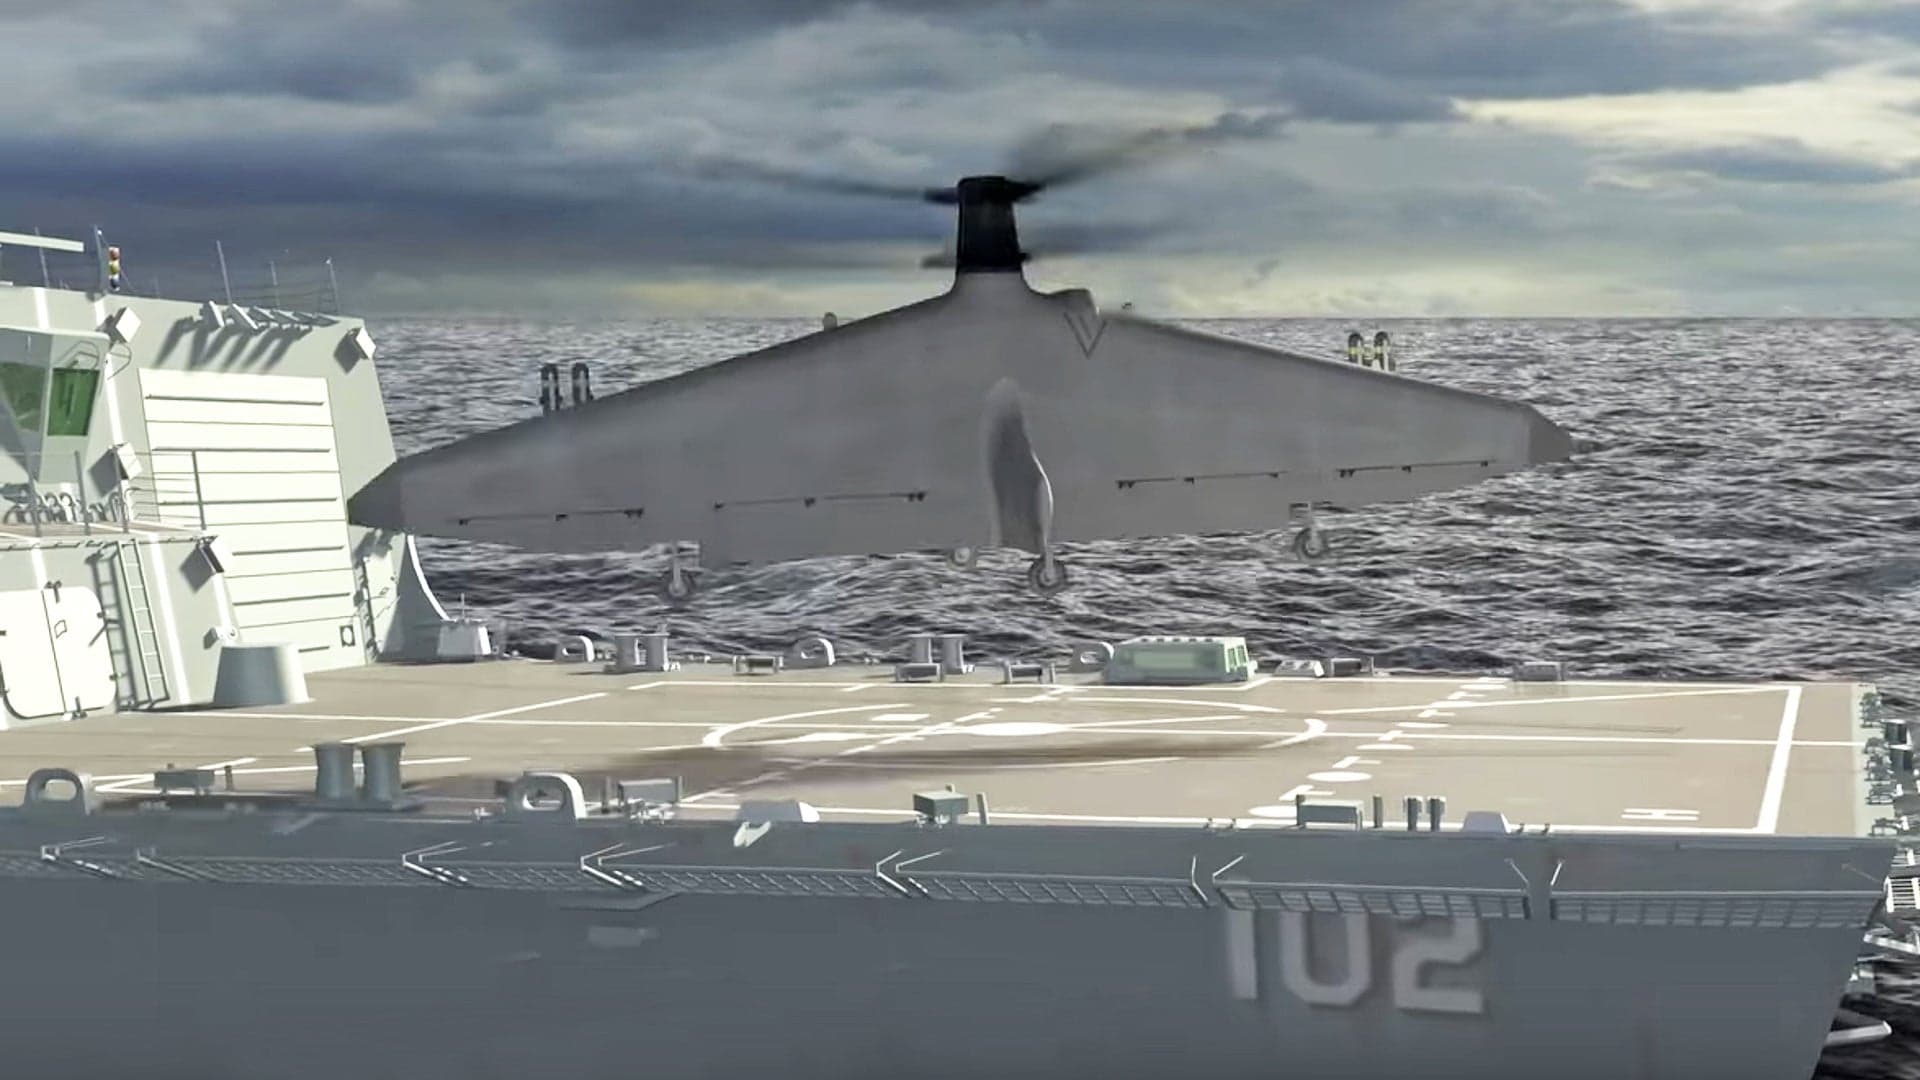 DARPA’s Revolutionary Fixed-Wing VTOL Naval Drone Gets The Video Treatment